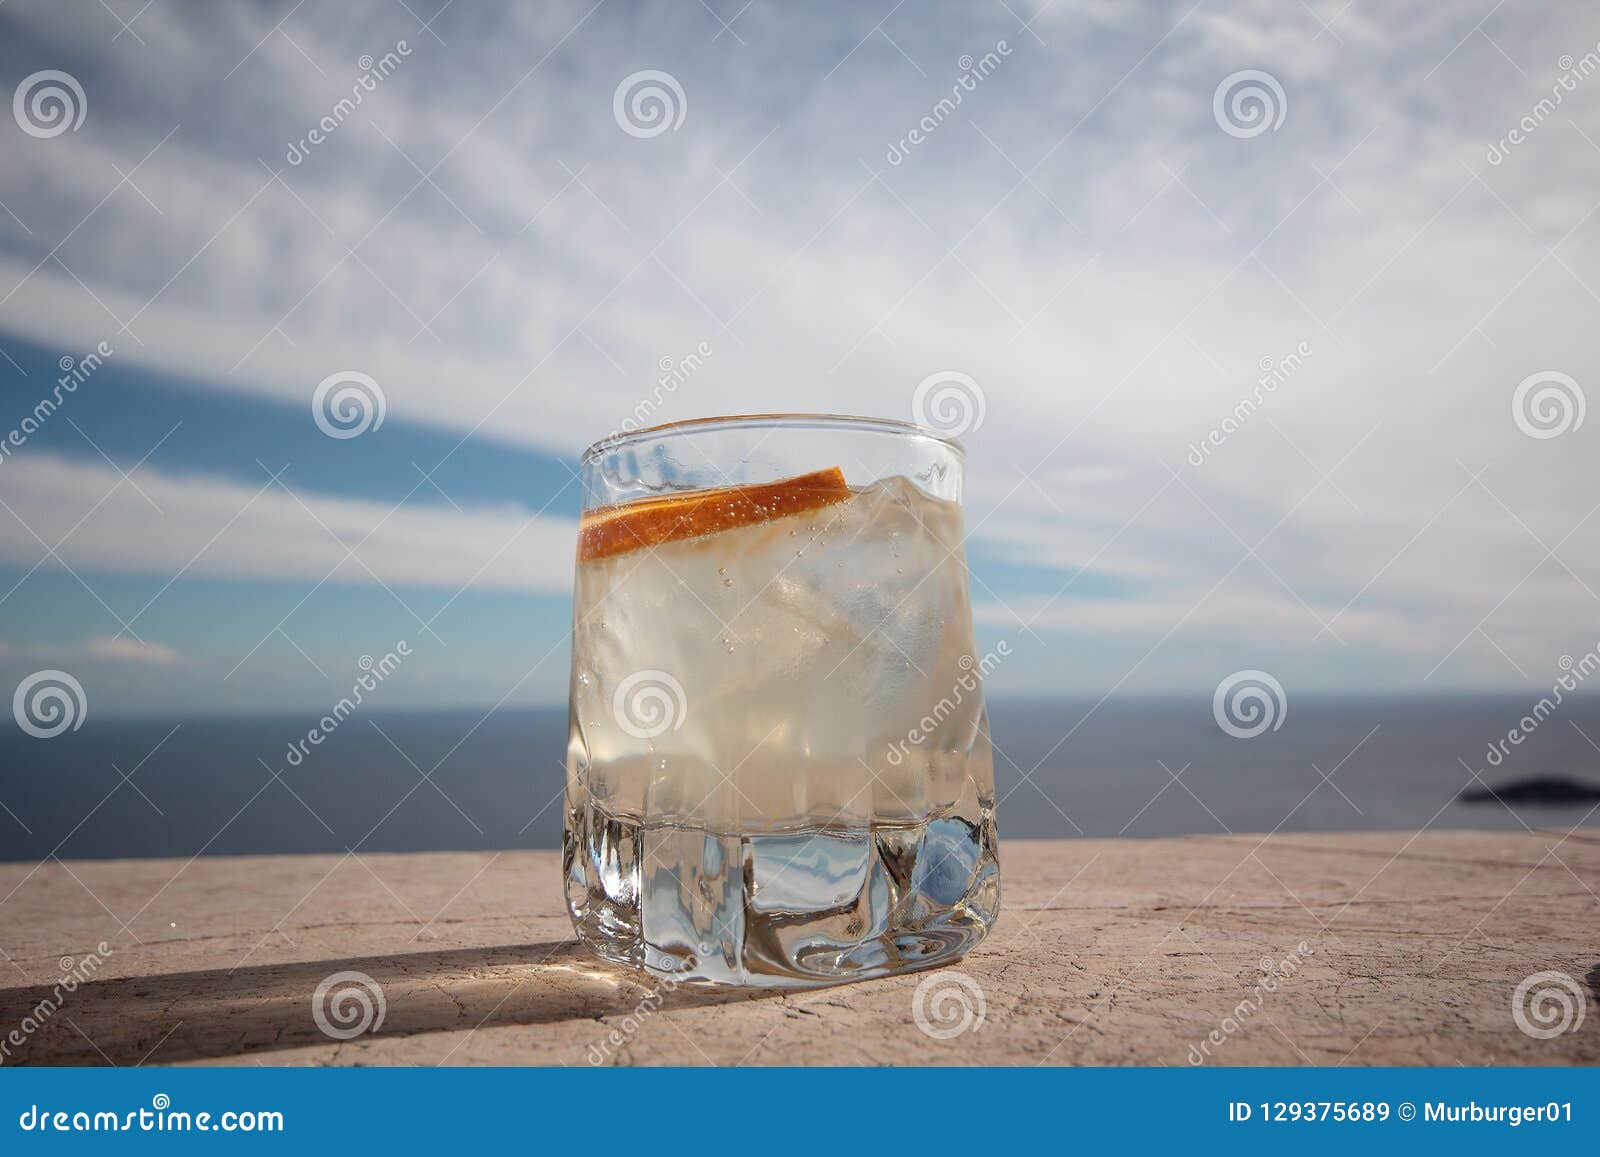 a cold drink on a hot summer day